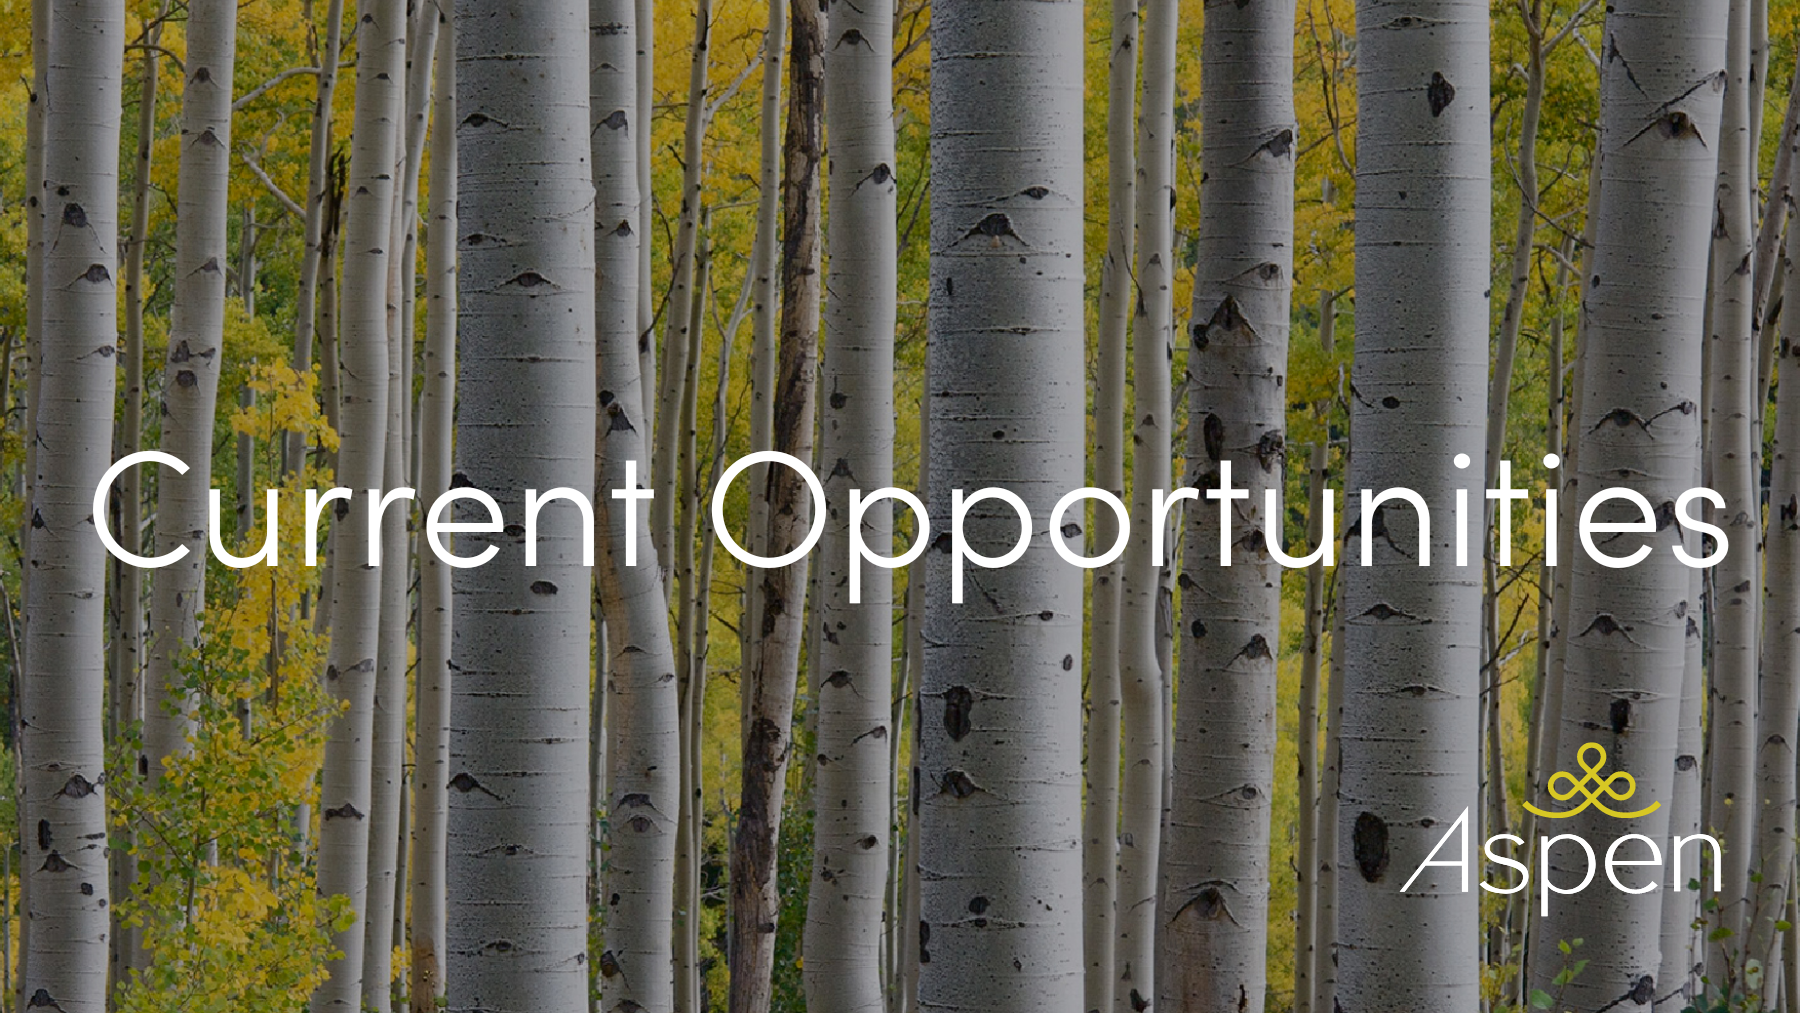 Current Opportunities Title in front of the trunks of Aspen trees